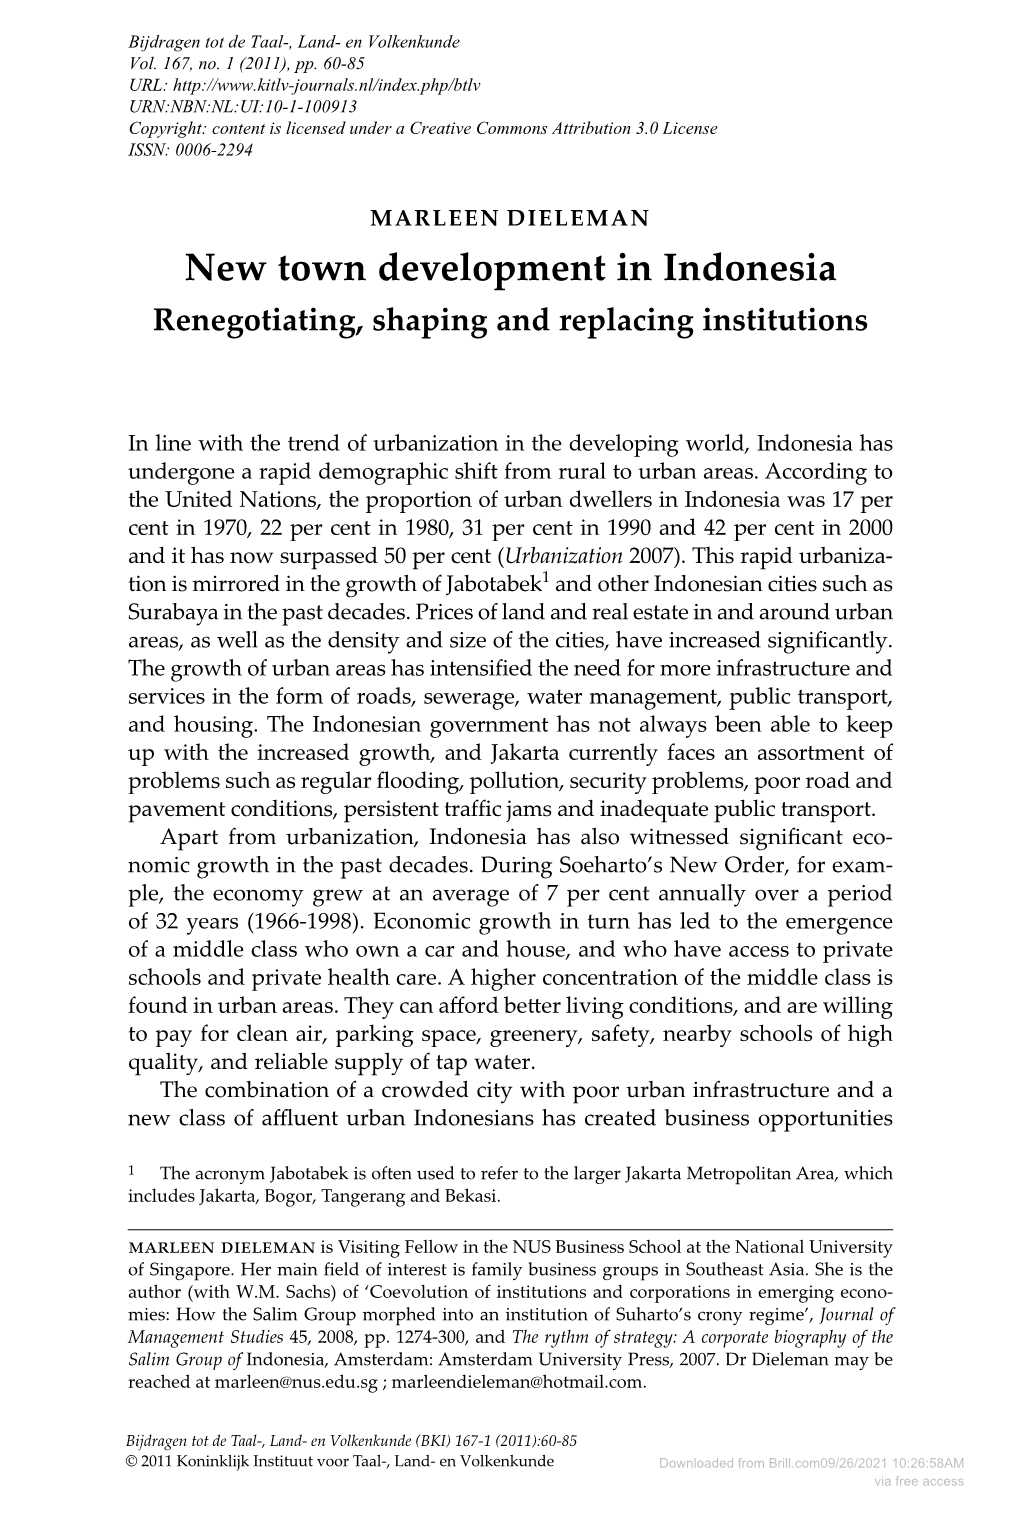 New Town Development in Indonesia Renegotiating, Shaping and Replacing Institutions